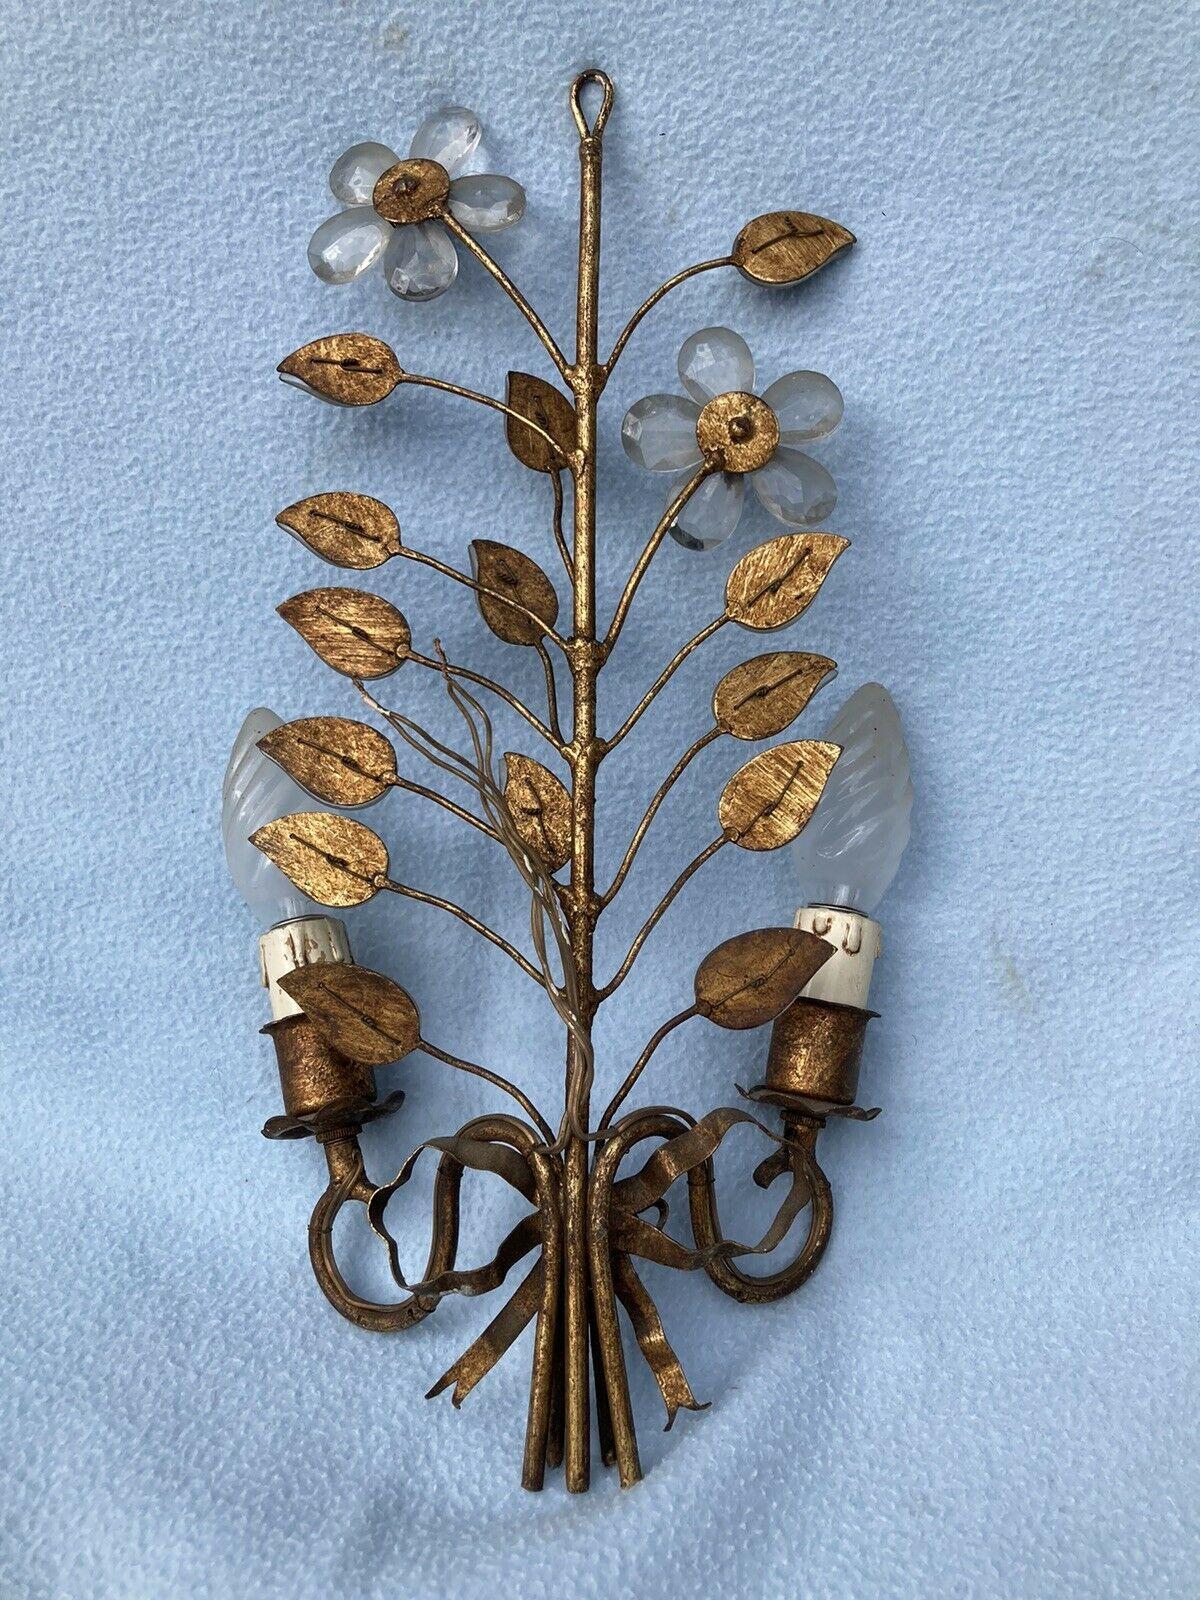 A Beautiful French Hollywood Regency Crystal Petal and Flower Wall Sconce. Singular statement piece!